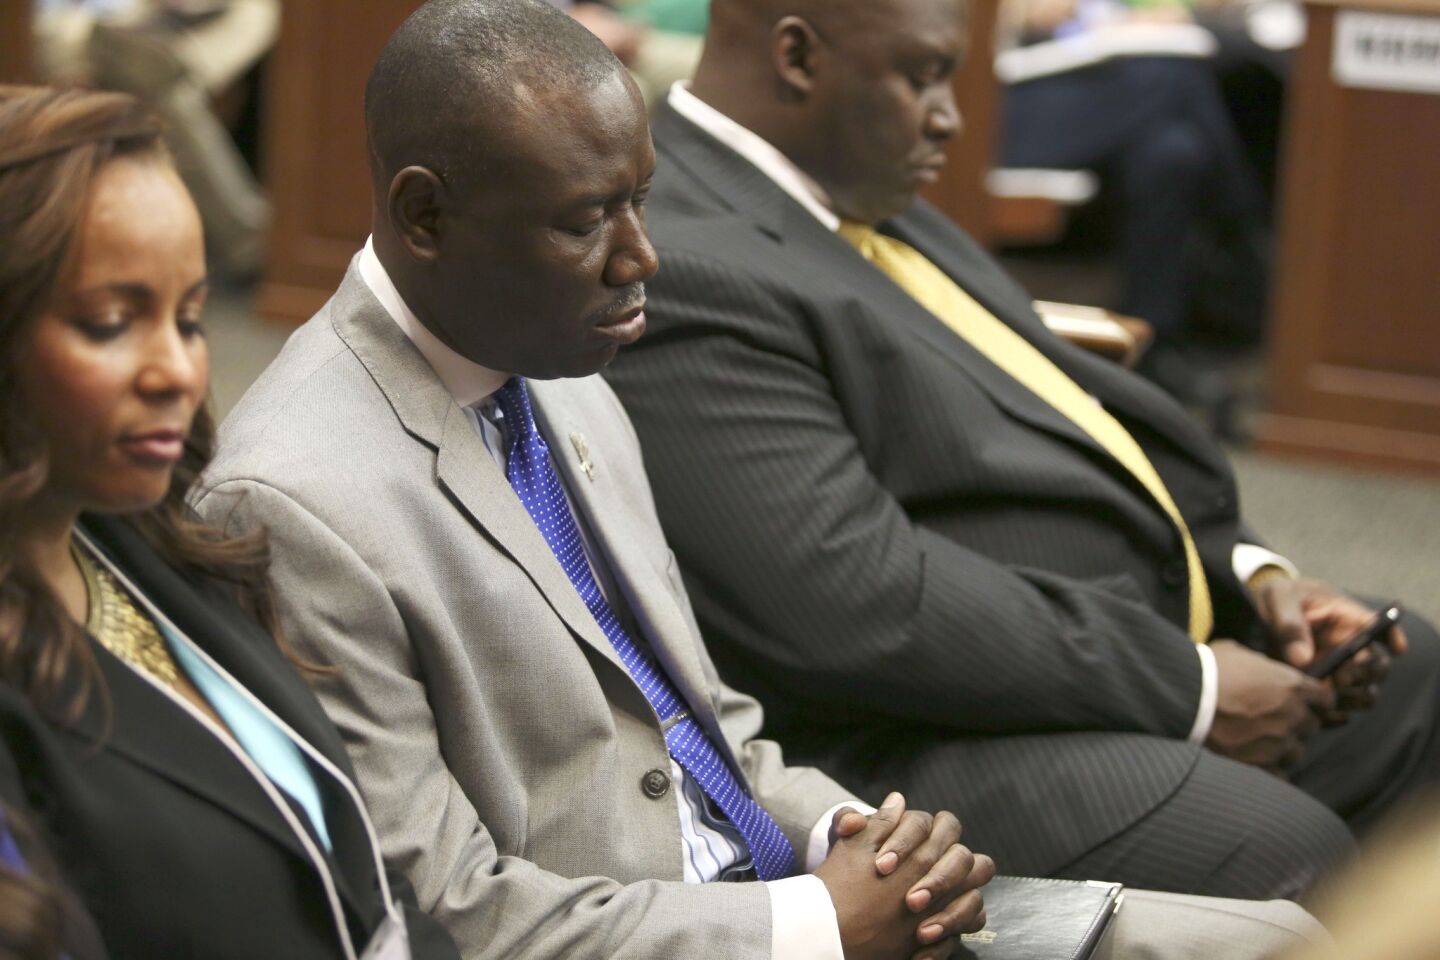 Attorneys Natalie Jackson, left, Benjamin Crump, and Daryl Parks sit in for Trayvon Martin's family during George Zimmerman's trial. Jurors found Zimmerman not guilty of second degree murder in the shooting of Martin last year in Sanford, Fla.